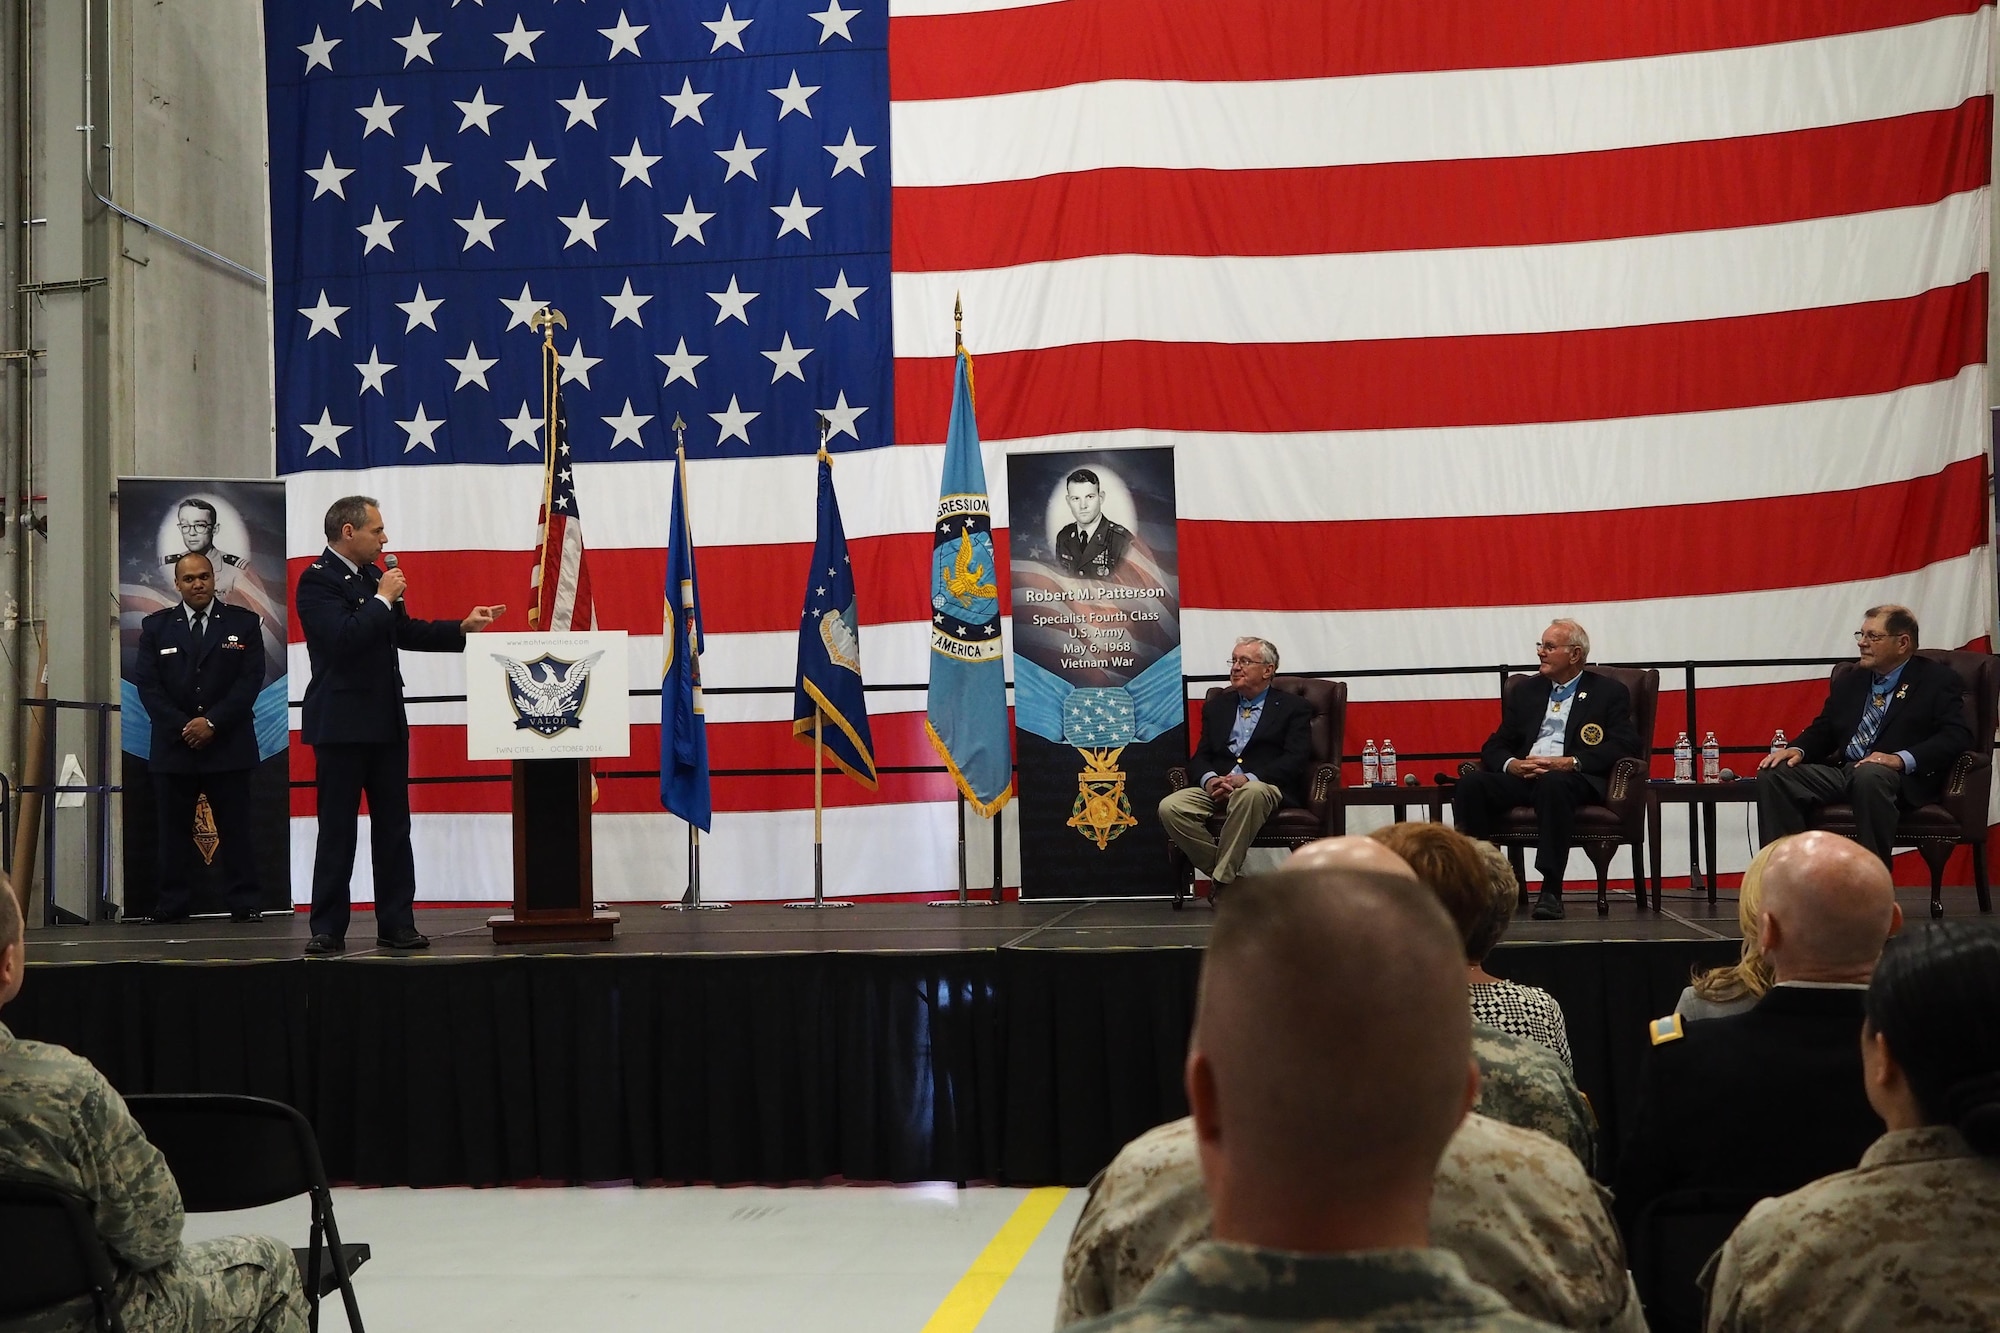 Col. Anthony Polashek, 934th Airlift Wing commander, pays tribute to Medal of Honor recipients Thomas Kelley, Robert Patterson and Harold Fritz. (Air Force Photo/Paul Zadach)